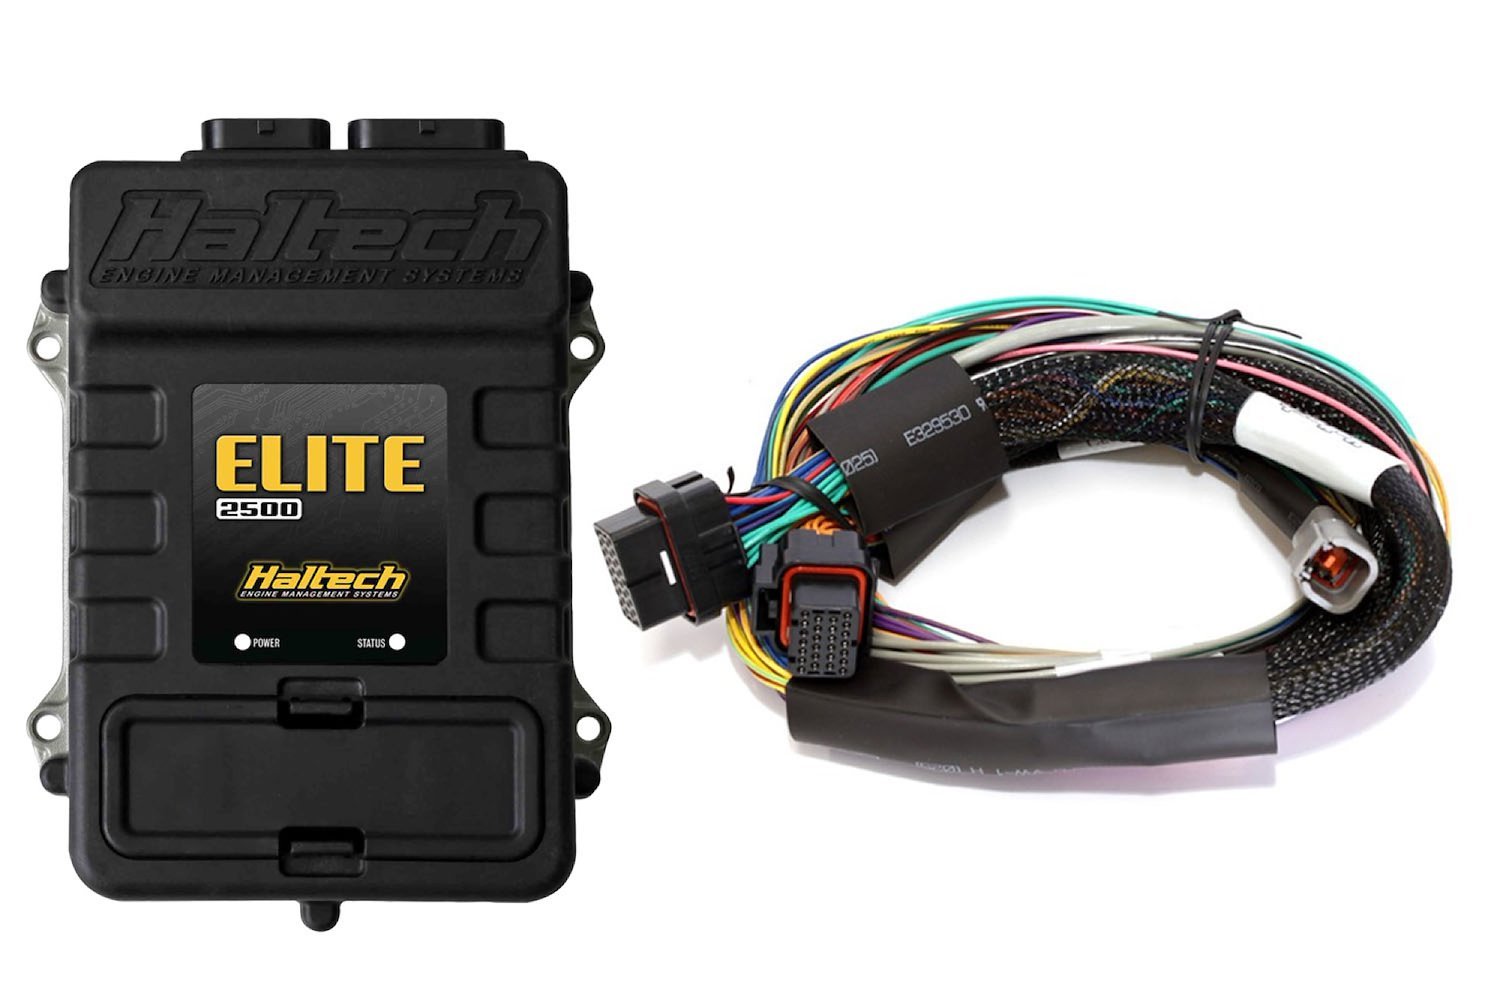 HT-151302 Elite 2500 + Basic Universal Wire-in Harness Kit, 2.5m (8')